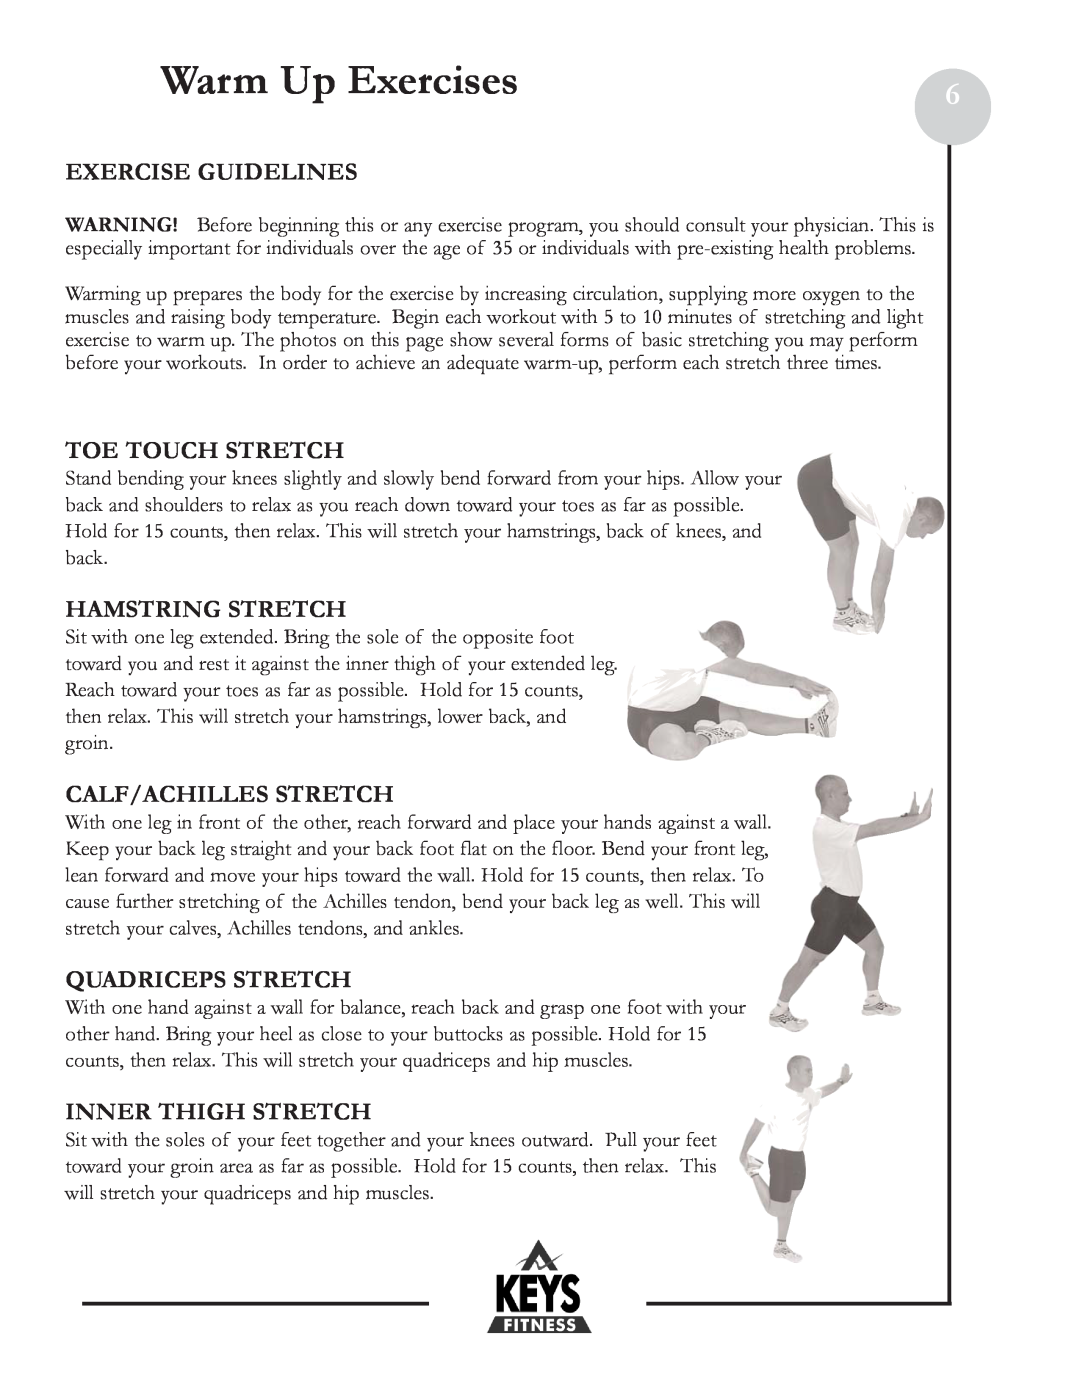 Keys Fitness HT800HR Warm Up Exercises, Exercise Guidelines, Toe Touch Stretch, Hamstring Stretch, Calf/Achilles Stretch 